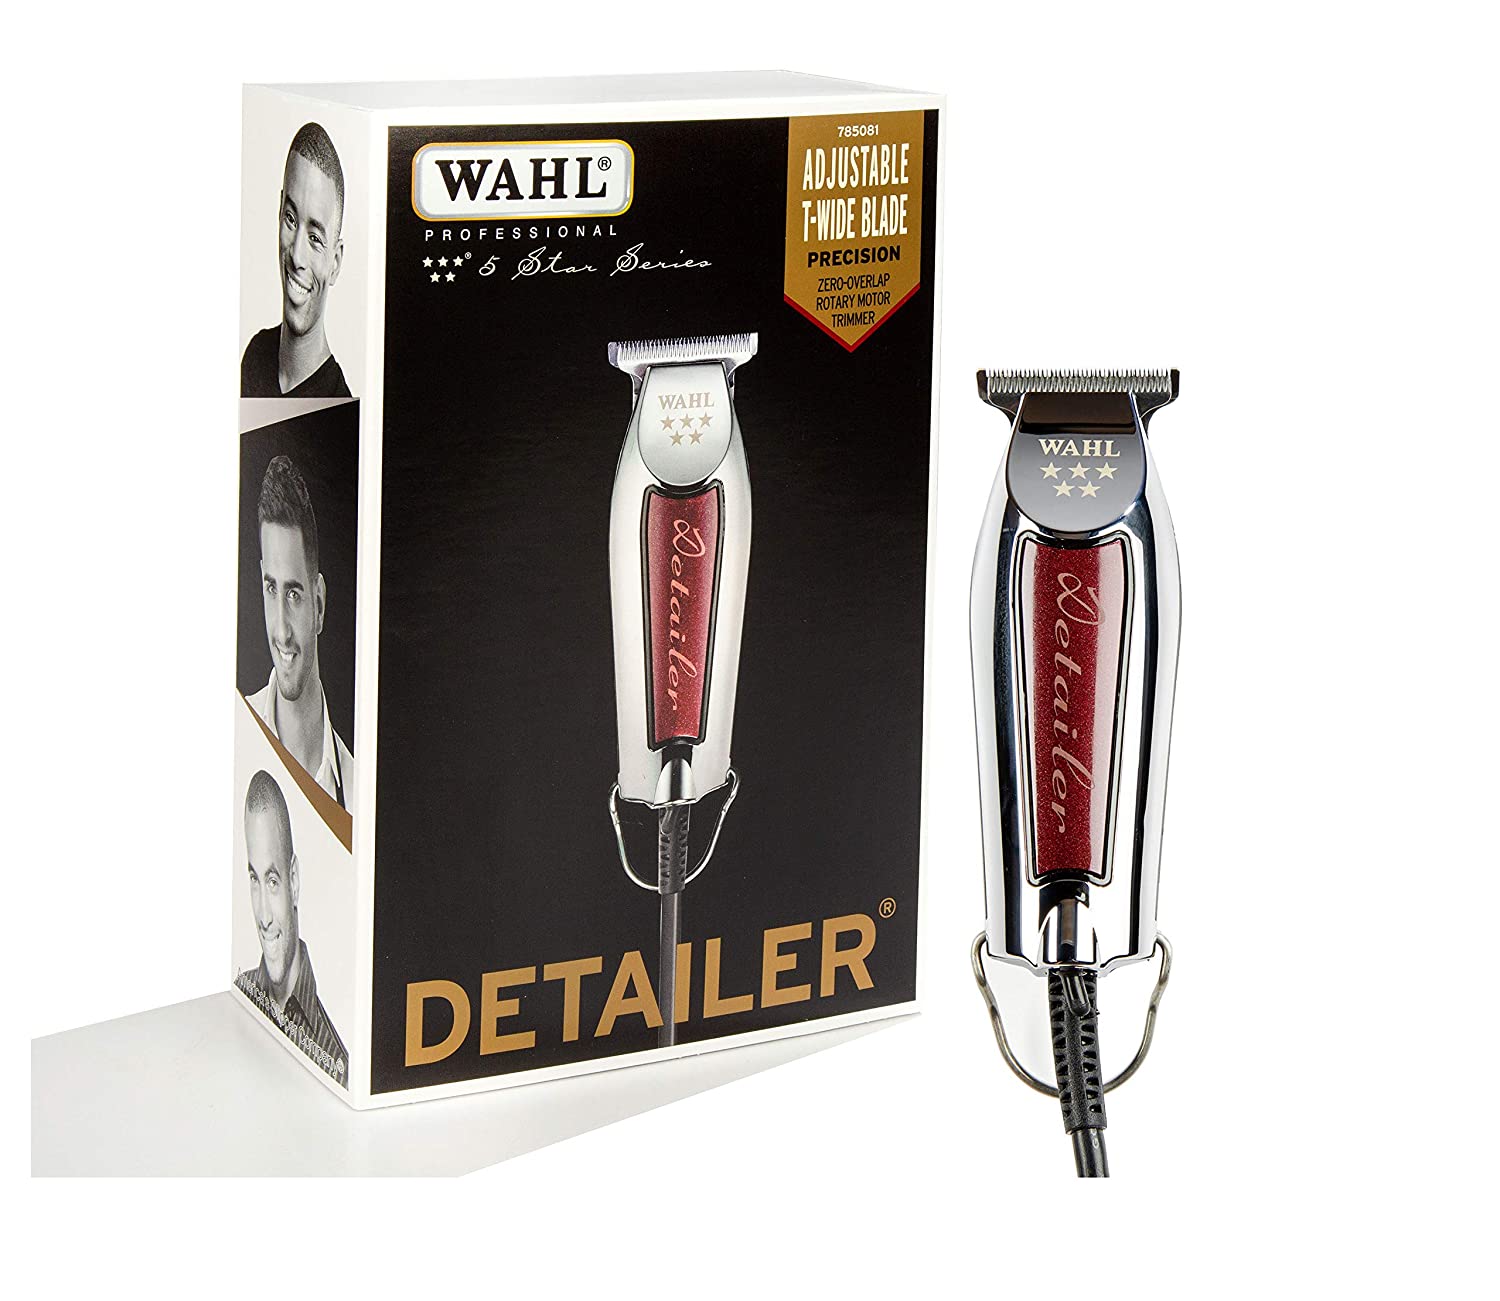 Wahl 5-Star Professional Trimmer